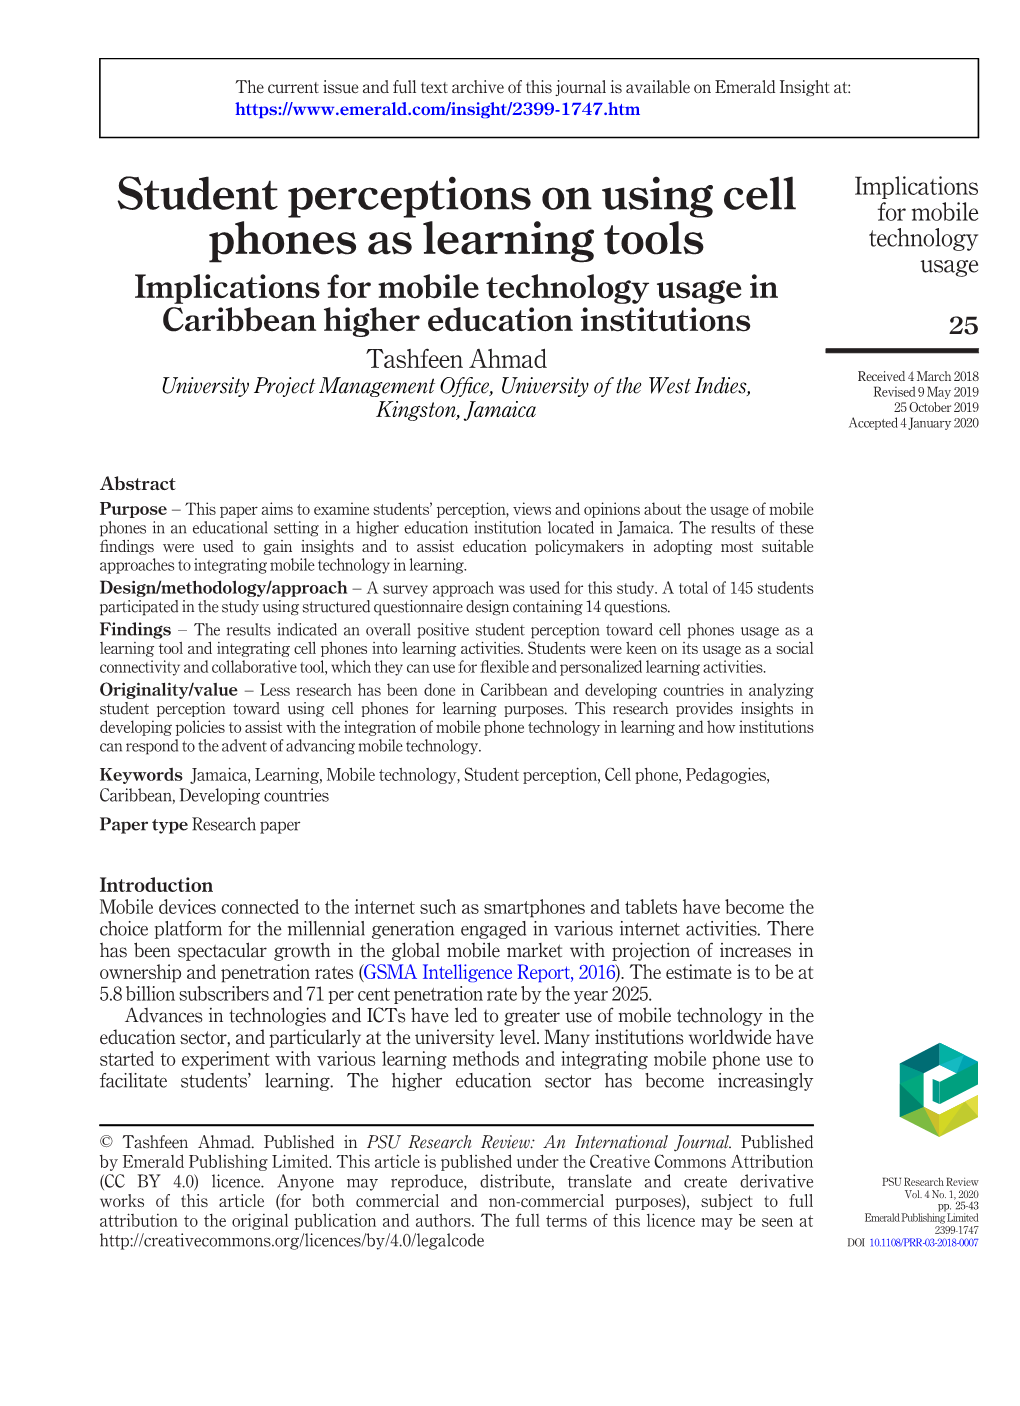 Student Perceptions on Using Cell Phones As Learning Tools